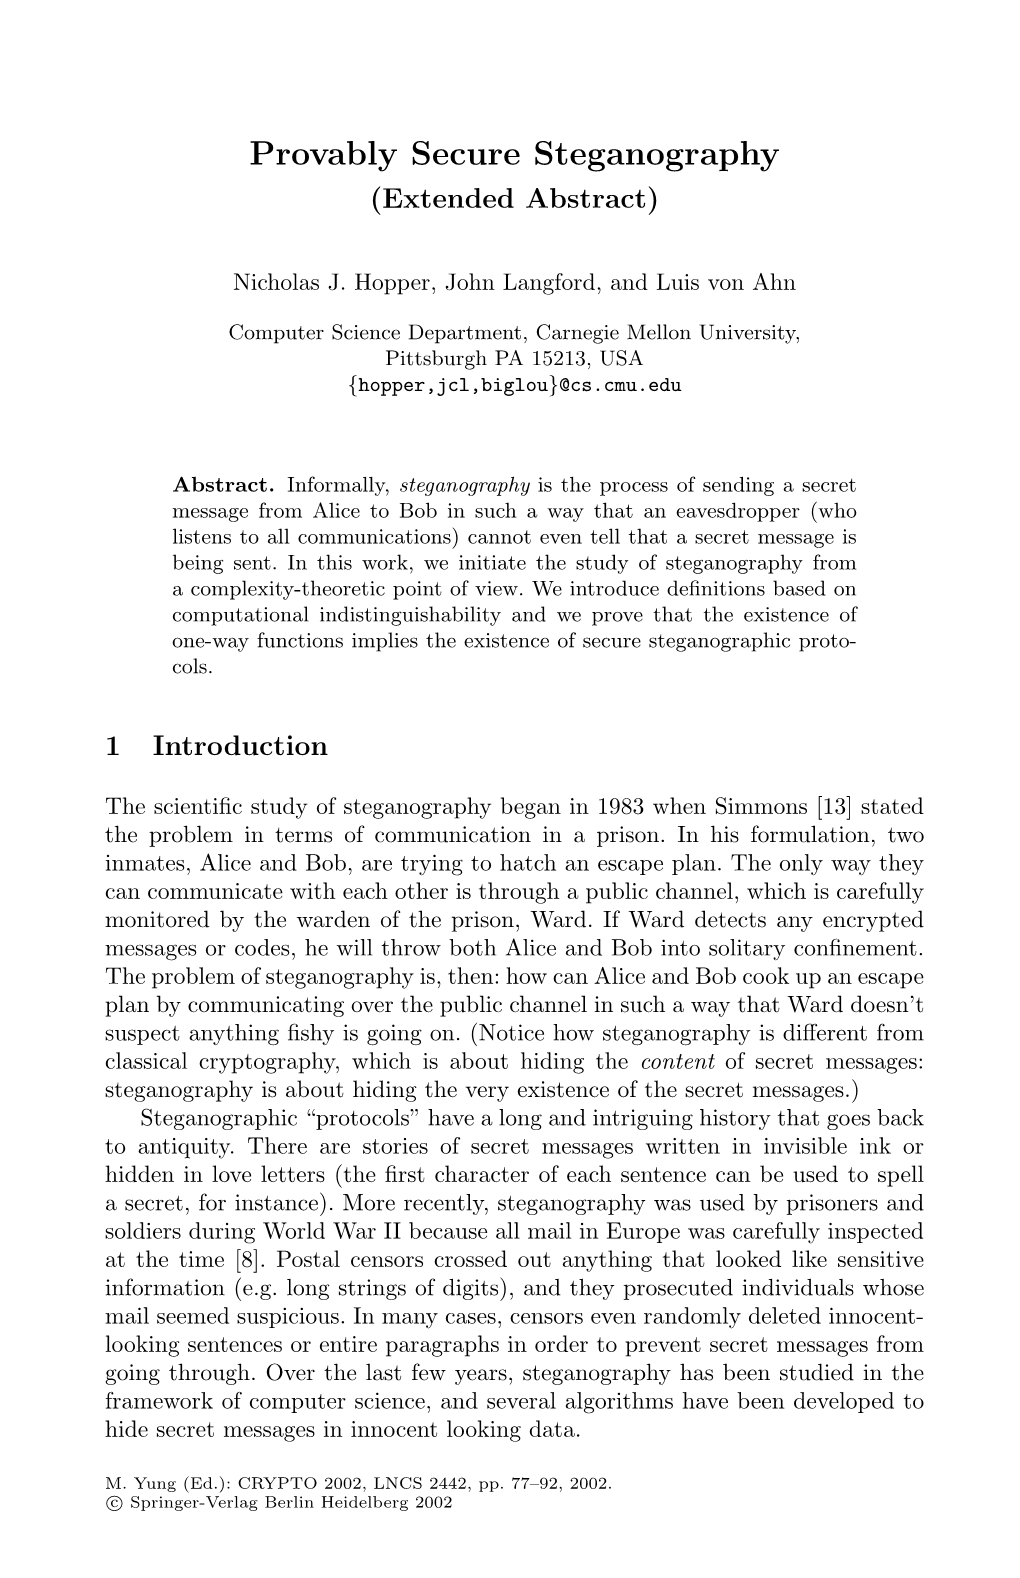 Provably Secure Steganography (Extended Abstract)